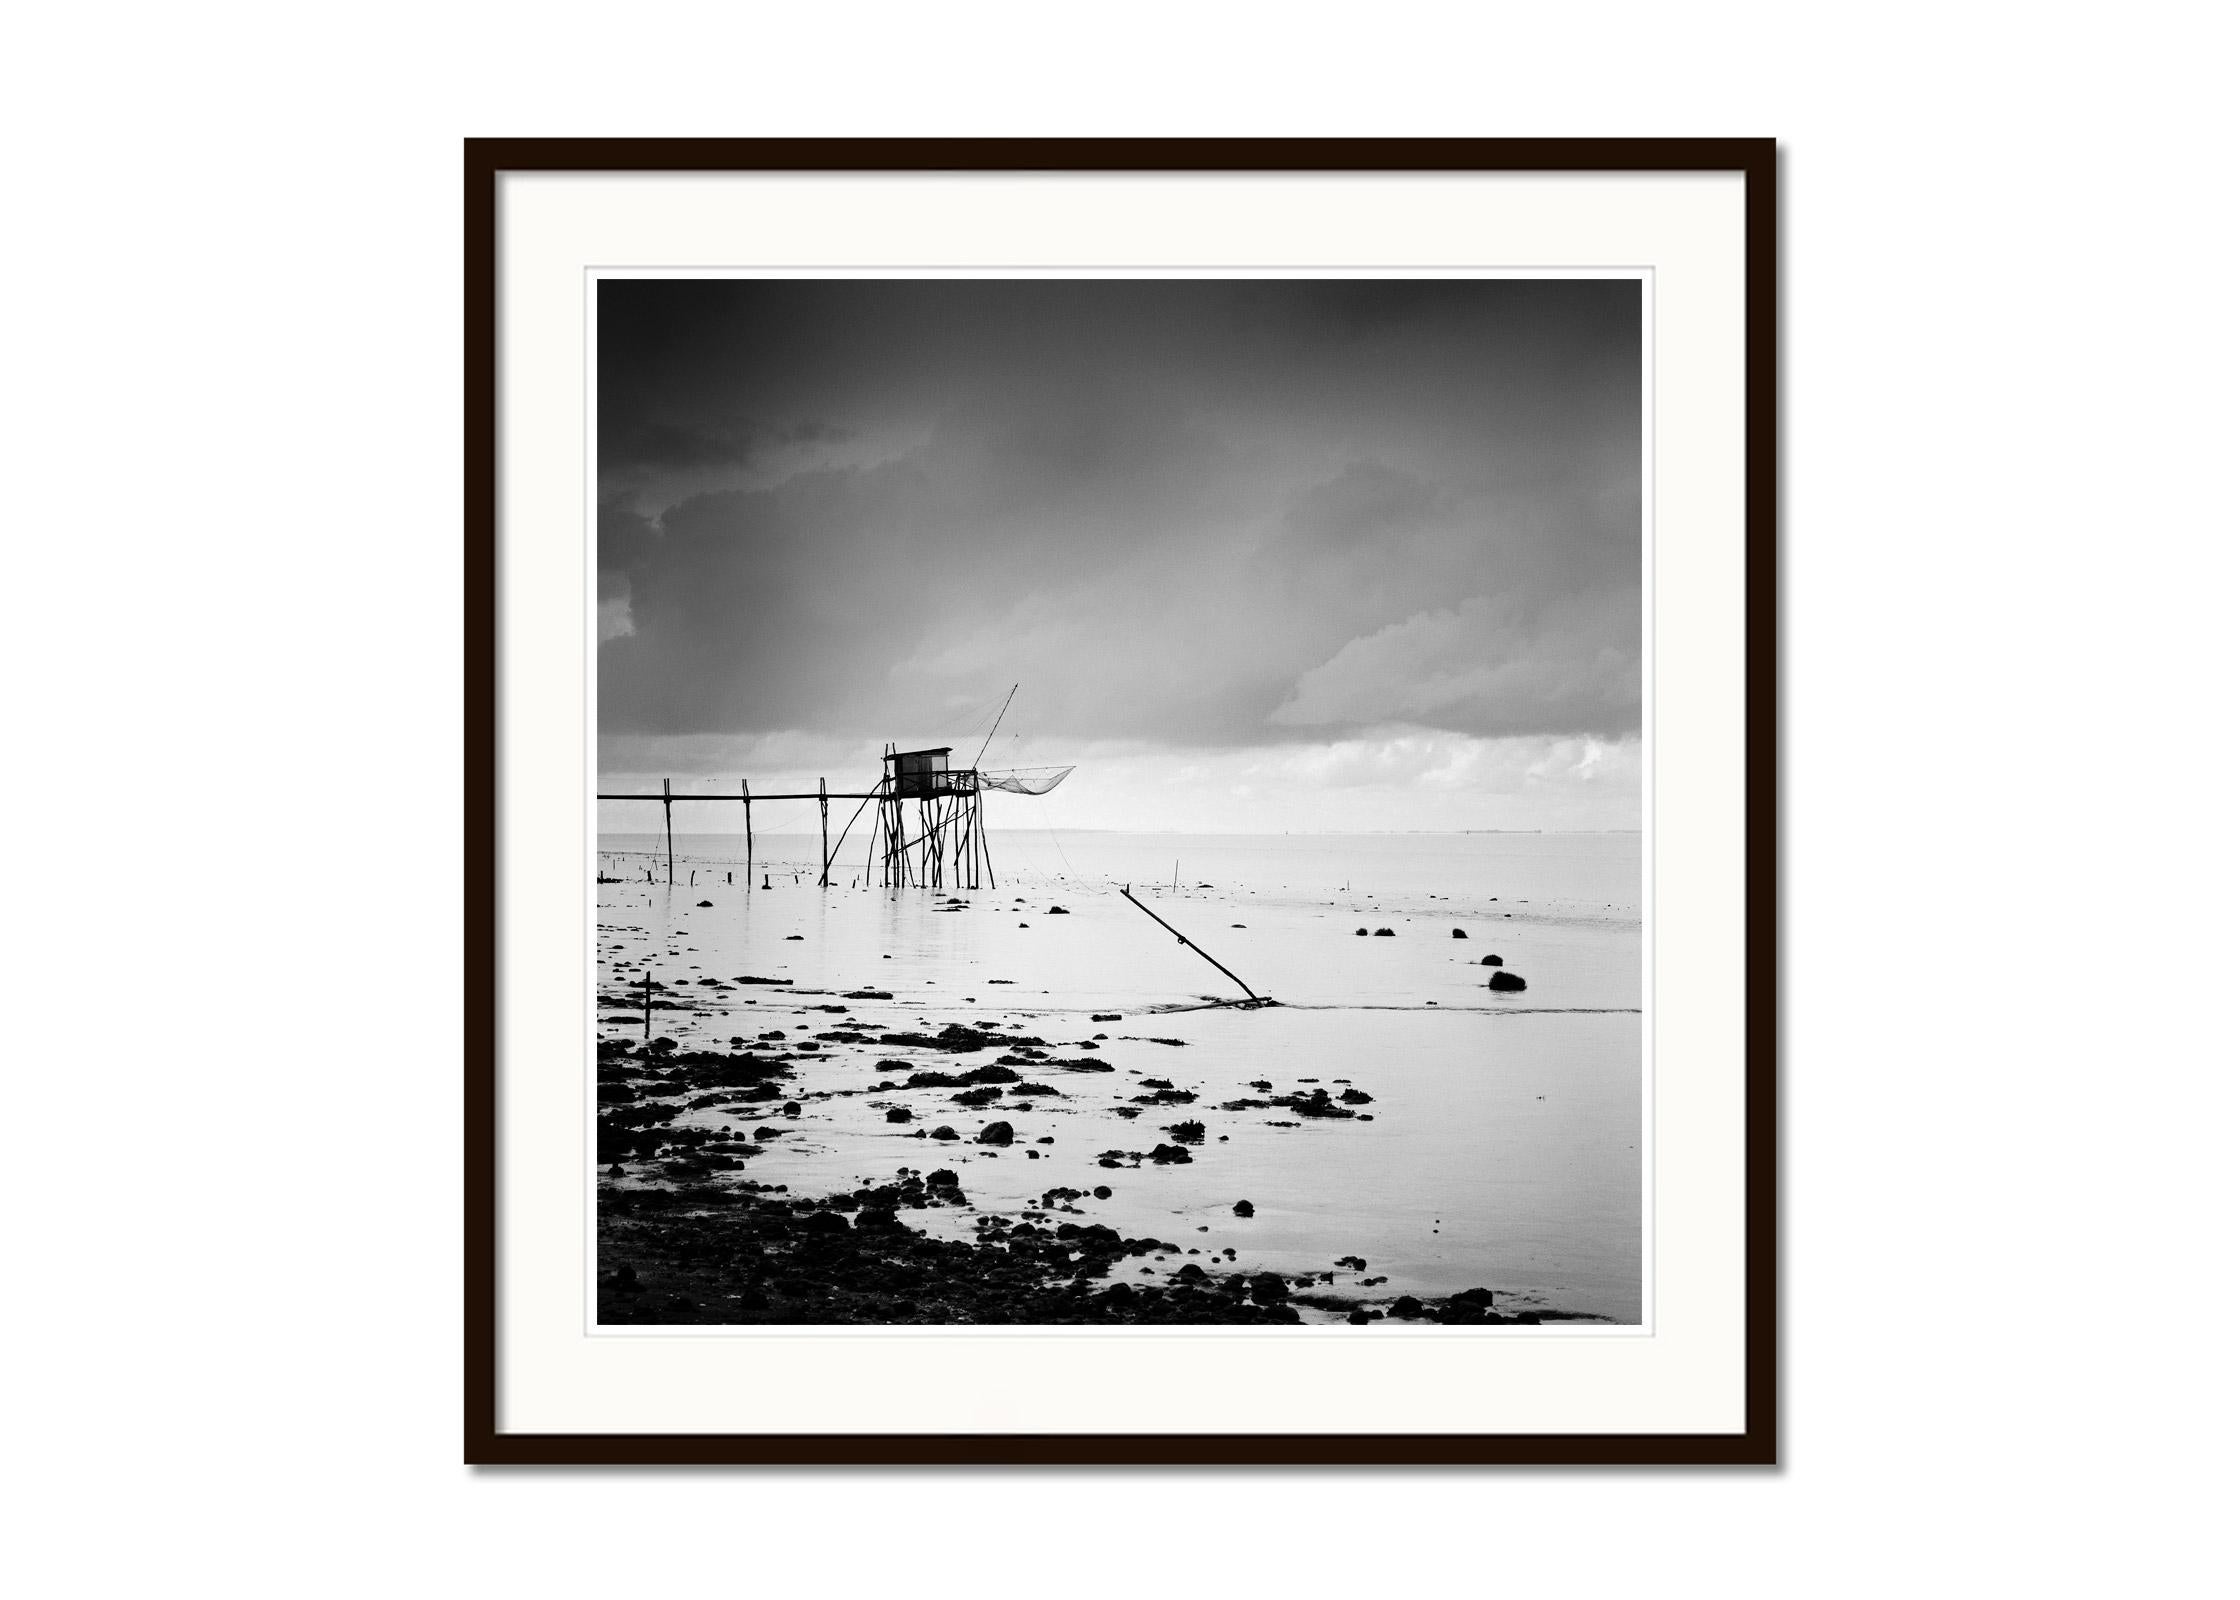 Low tide Fishing, Stilt House, sunset, France,  blackwhite landscape photography - Contemporary Photograph by Gerald Berghammer